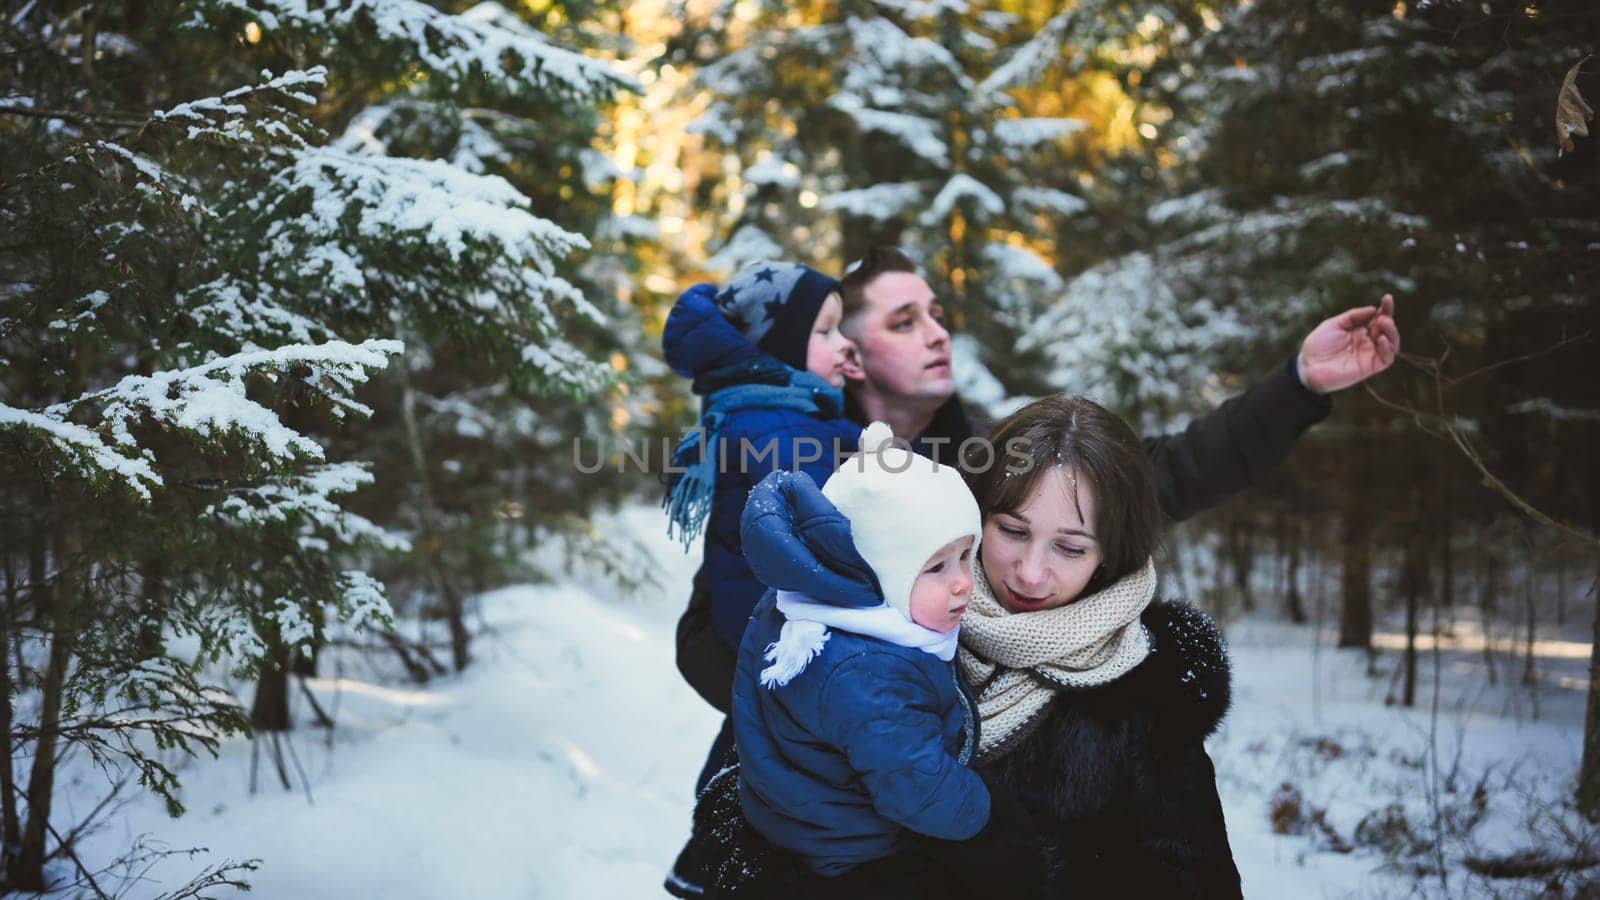 A young family is walking through a winter forest